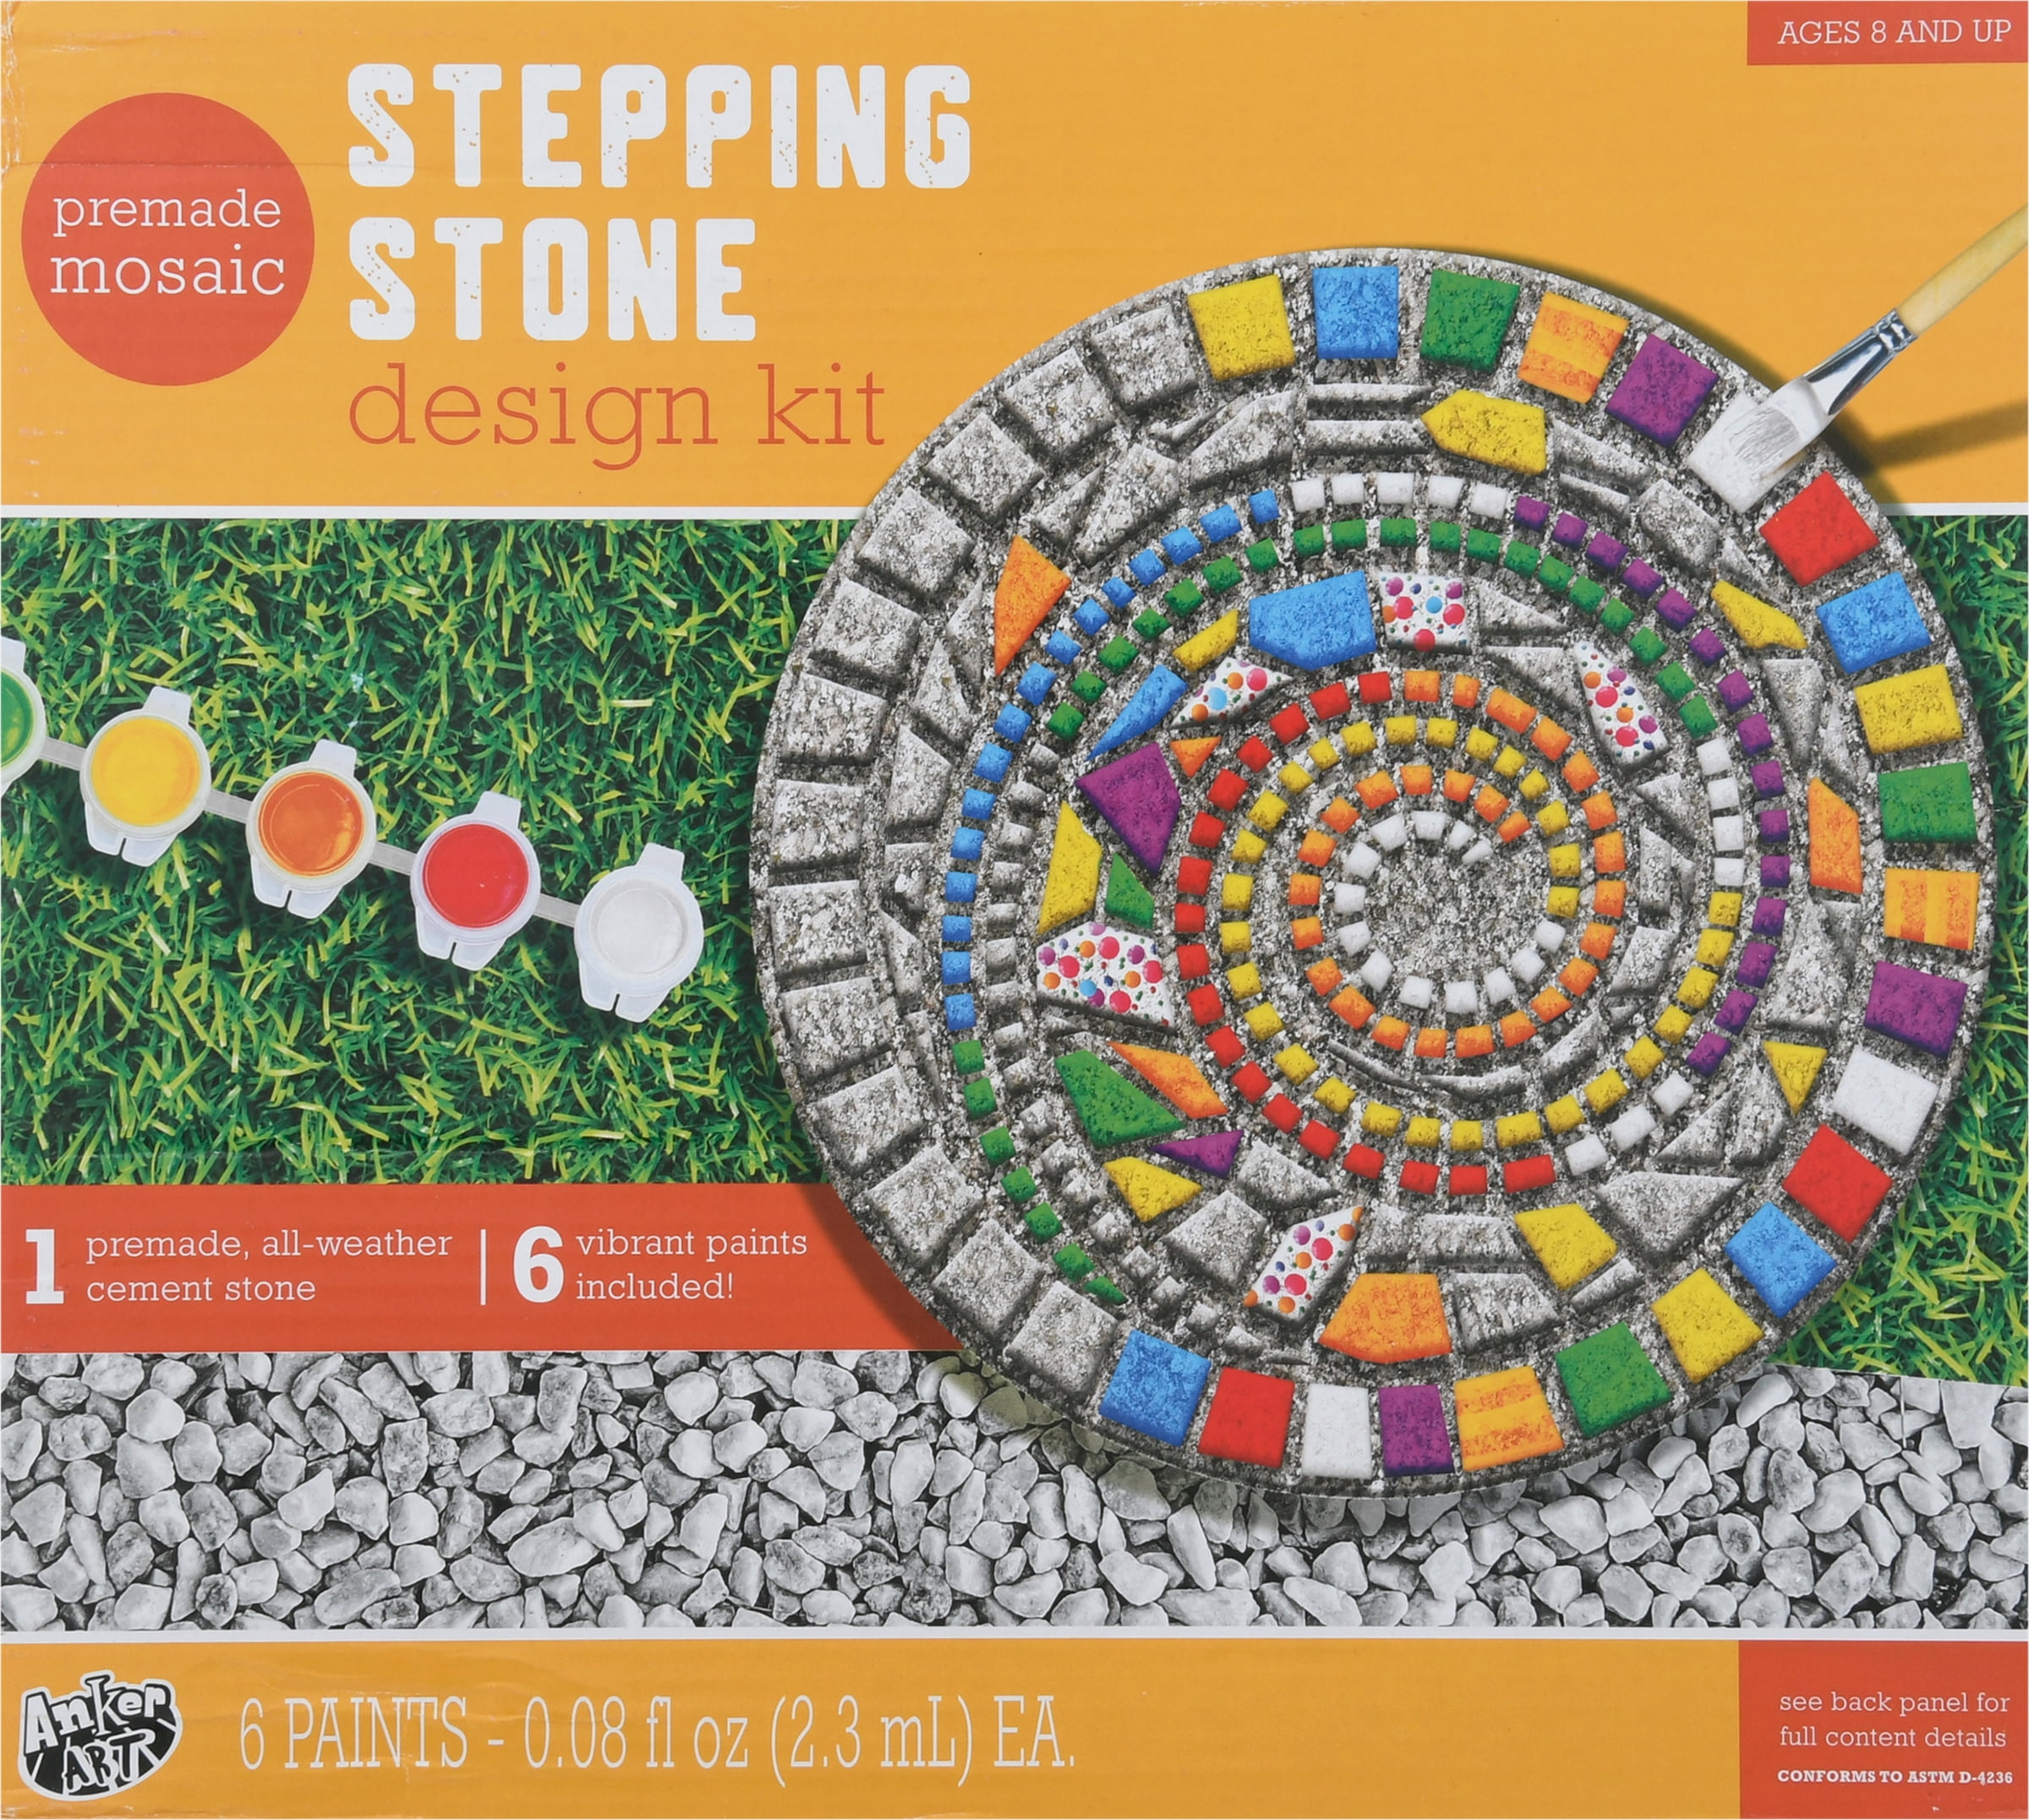  Paint Your Own Stepping Stones For Kids Craft Kit: 5 Pack Arts  and Crafts For Kids Ages 4-8, Art Supplies for Boys Girls Gifts for 3 4 5 6  7 8